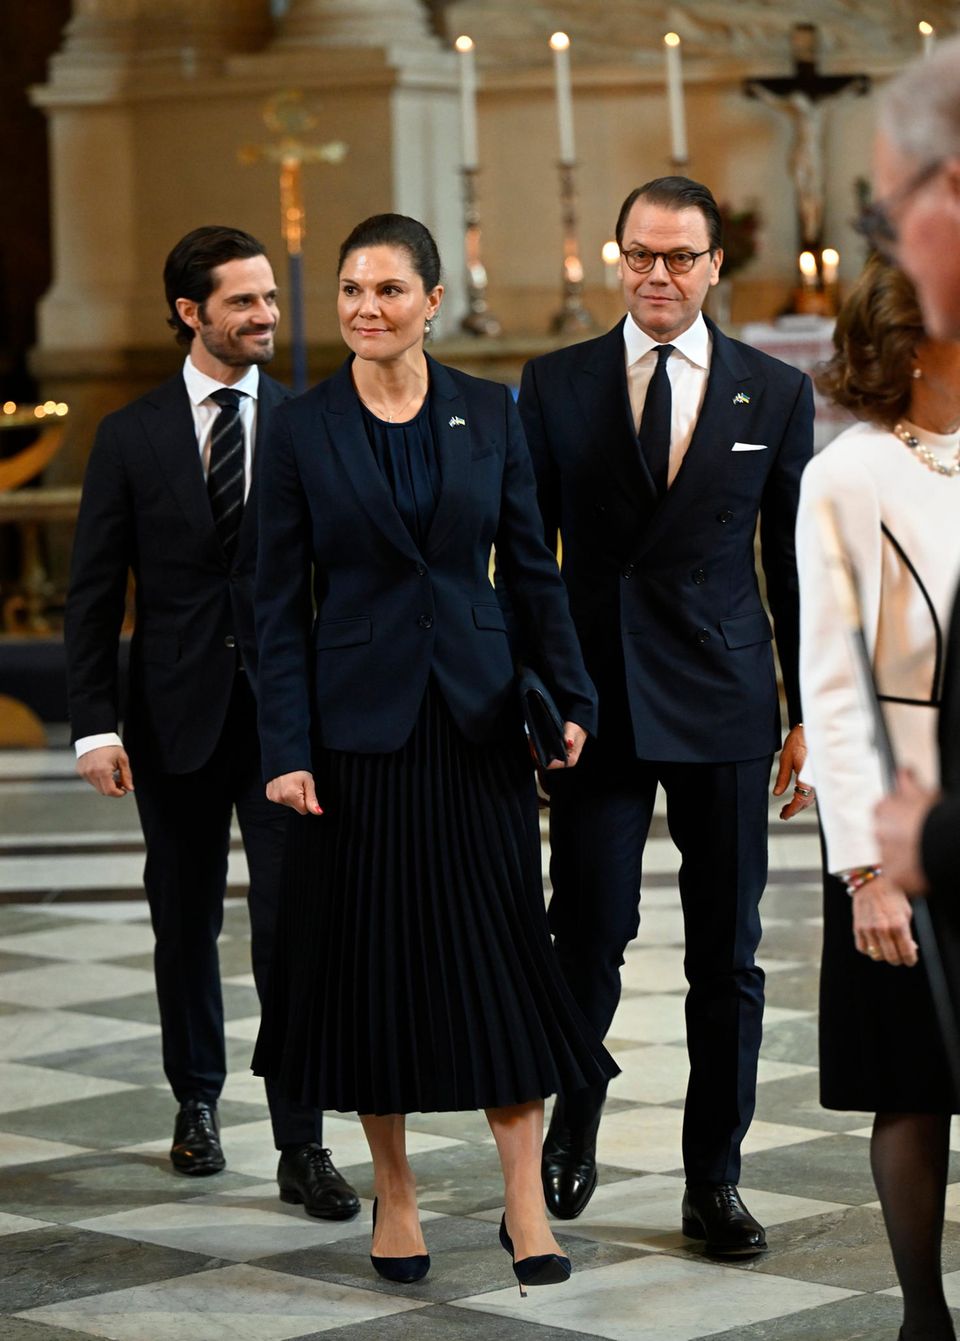 Crown Princess Victoria, Prince Daniel and Prince Carl Philip pray for peace in Stockholm.